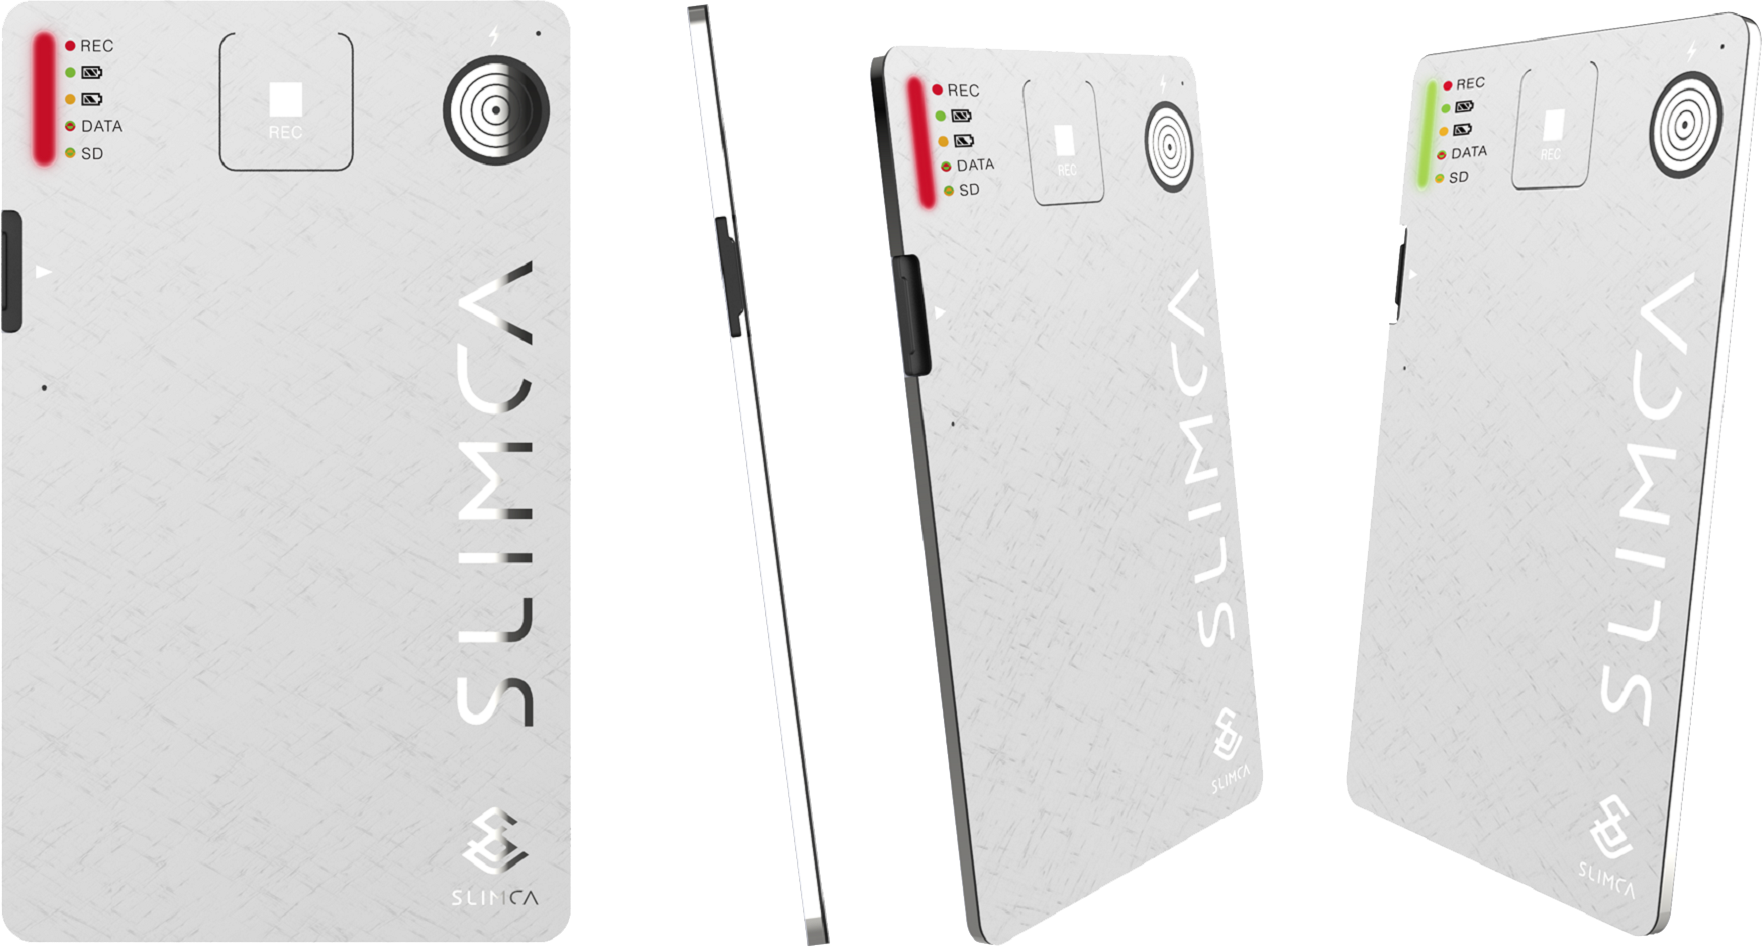 QREC The world’s thinnest voice recorder